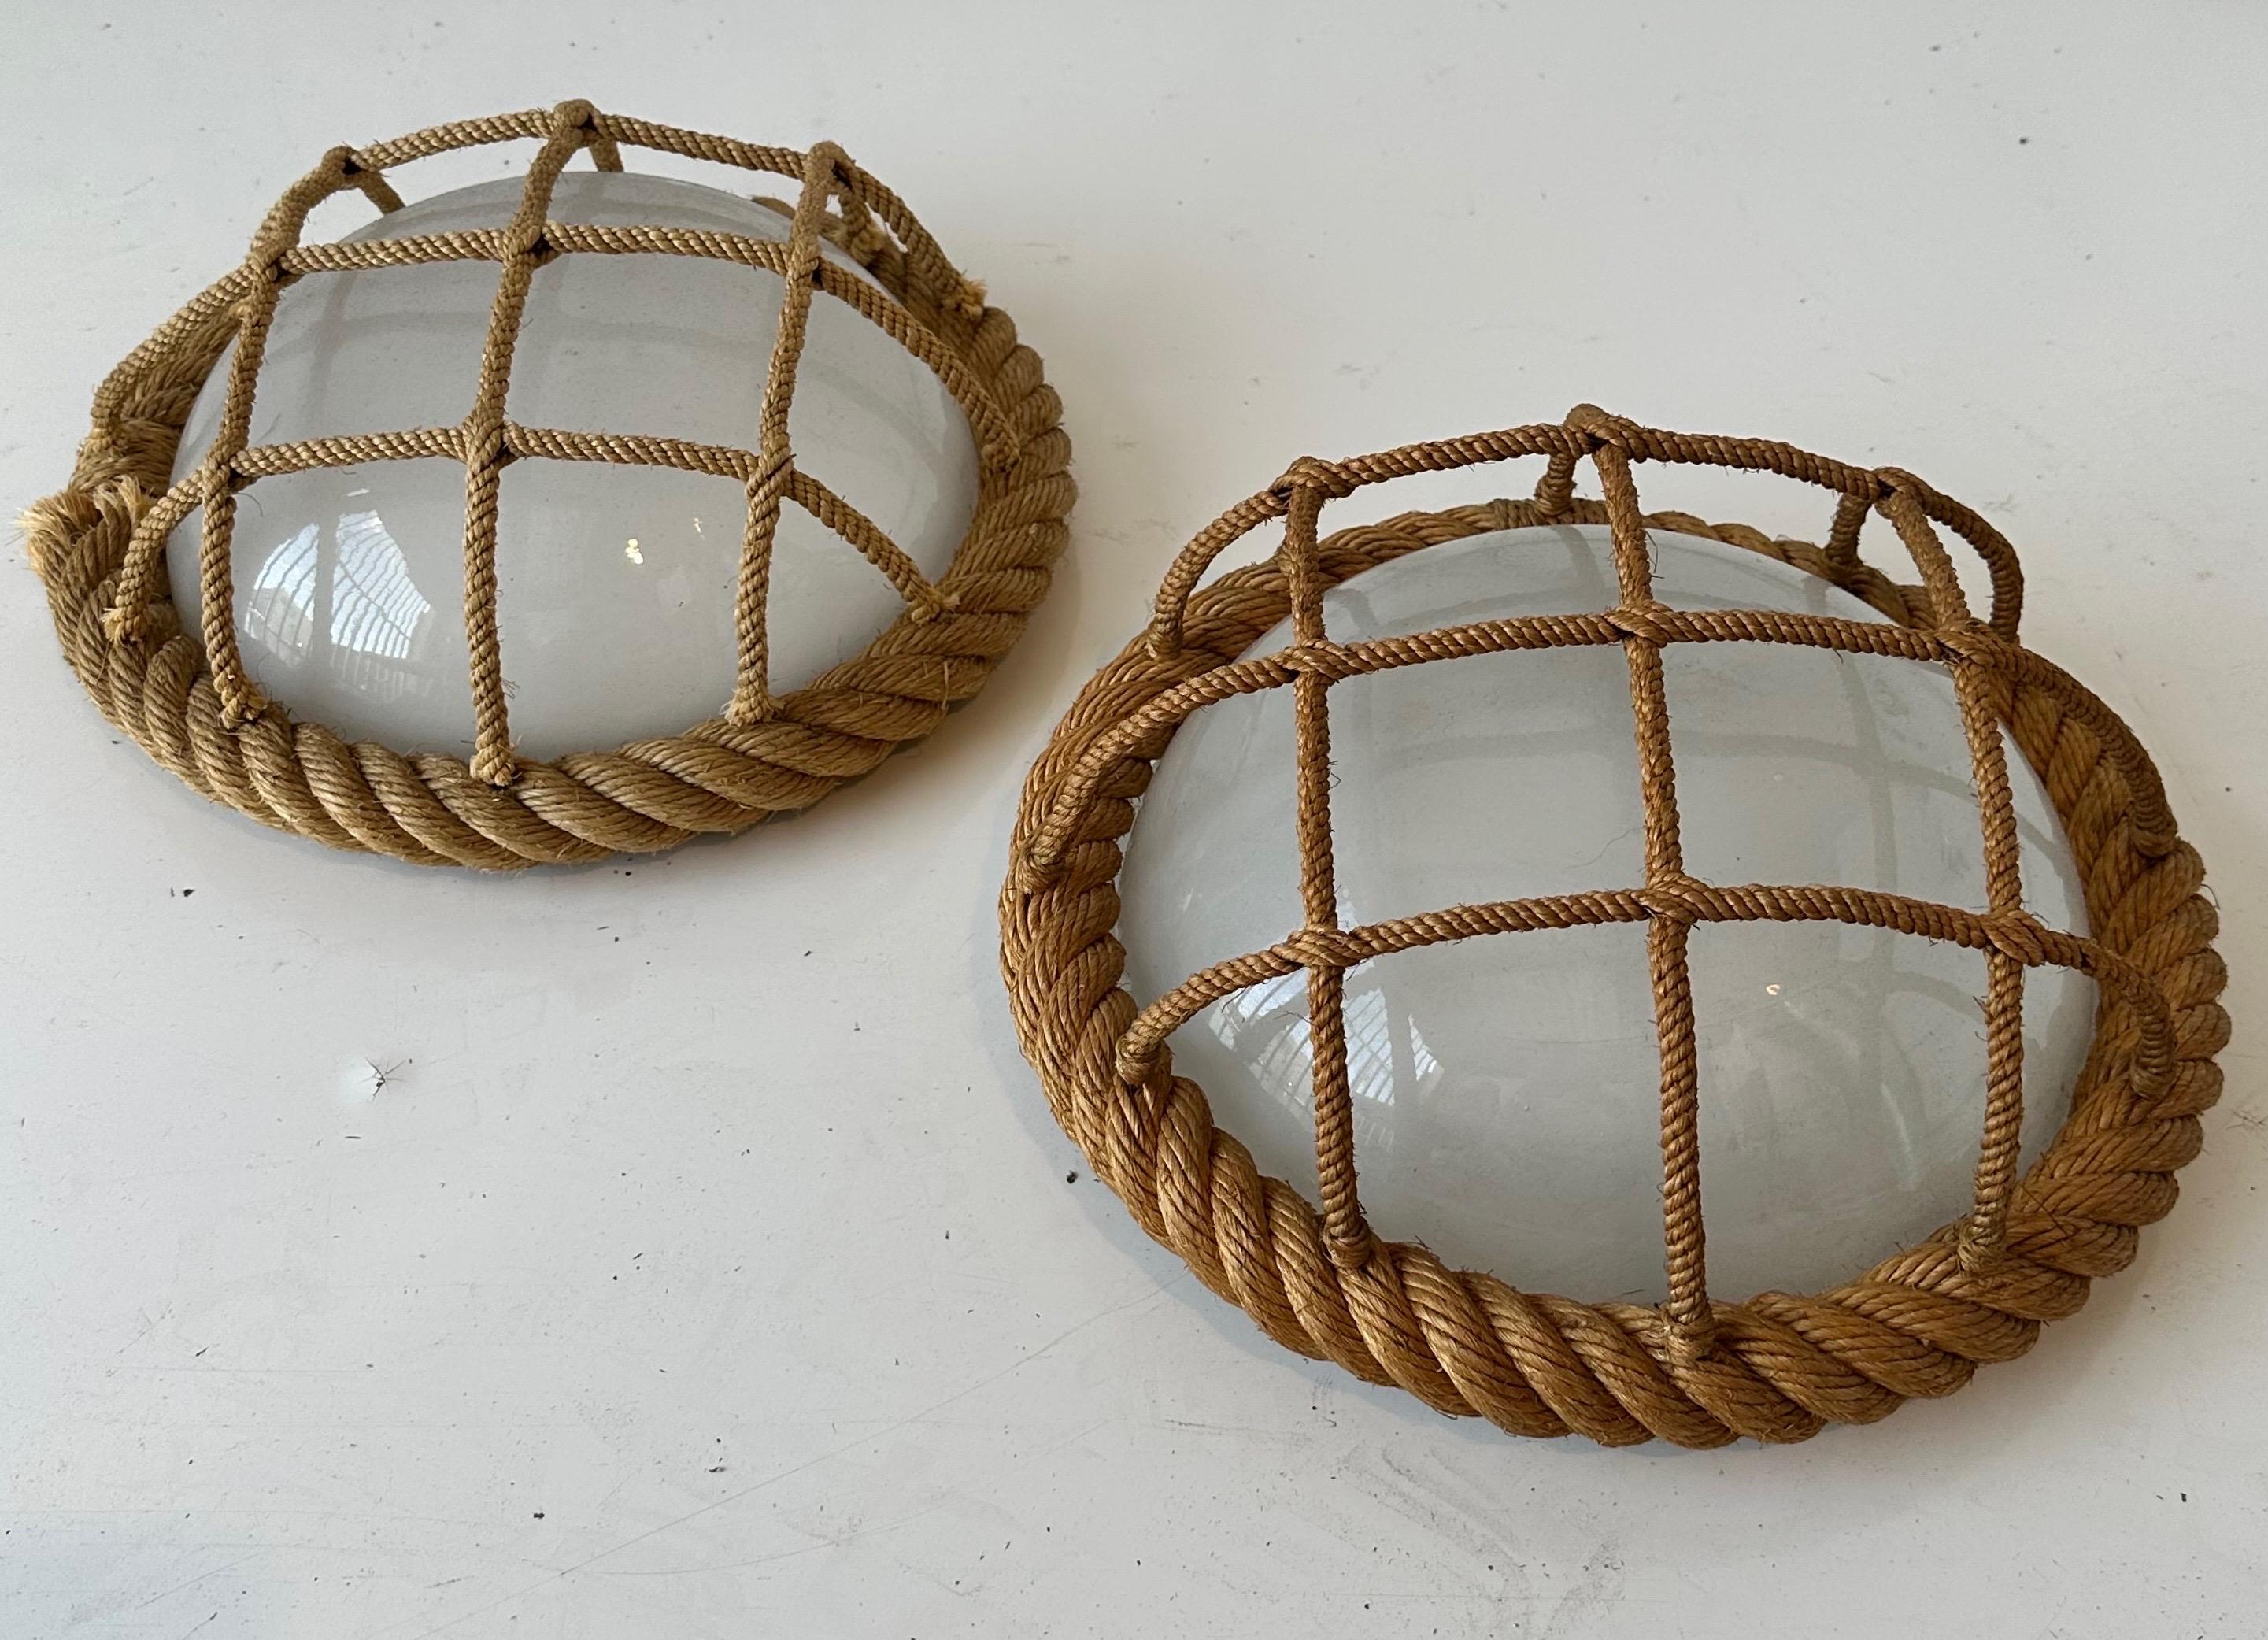 Pair of Audoux et Minet Rope Hublot Sconces, circa 1970
Original Vintage condition.
Made to cover a existing wall light , no electrical device is included.